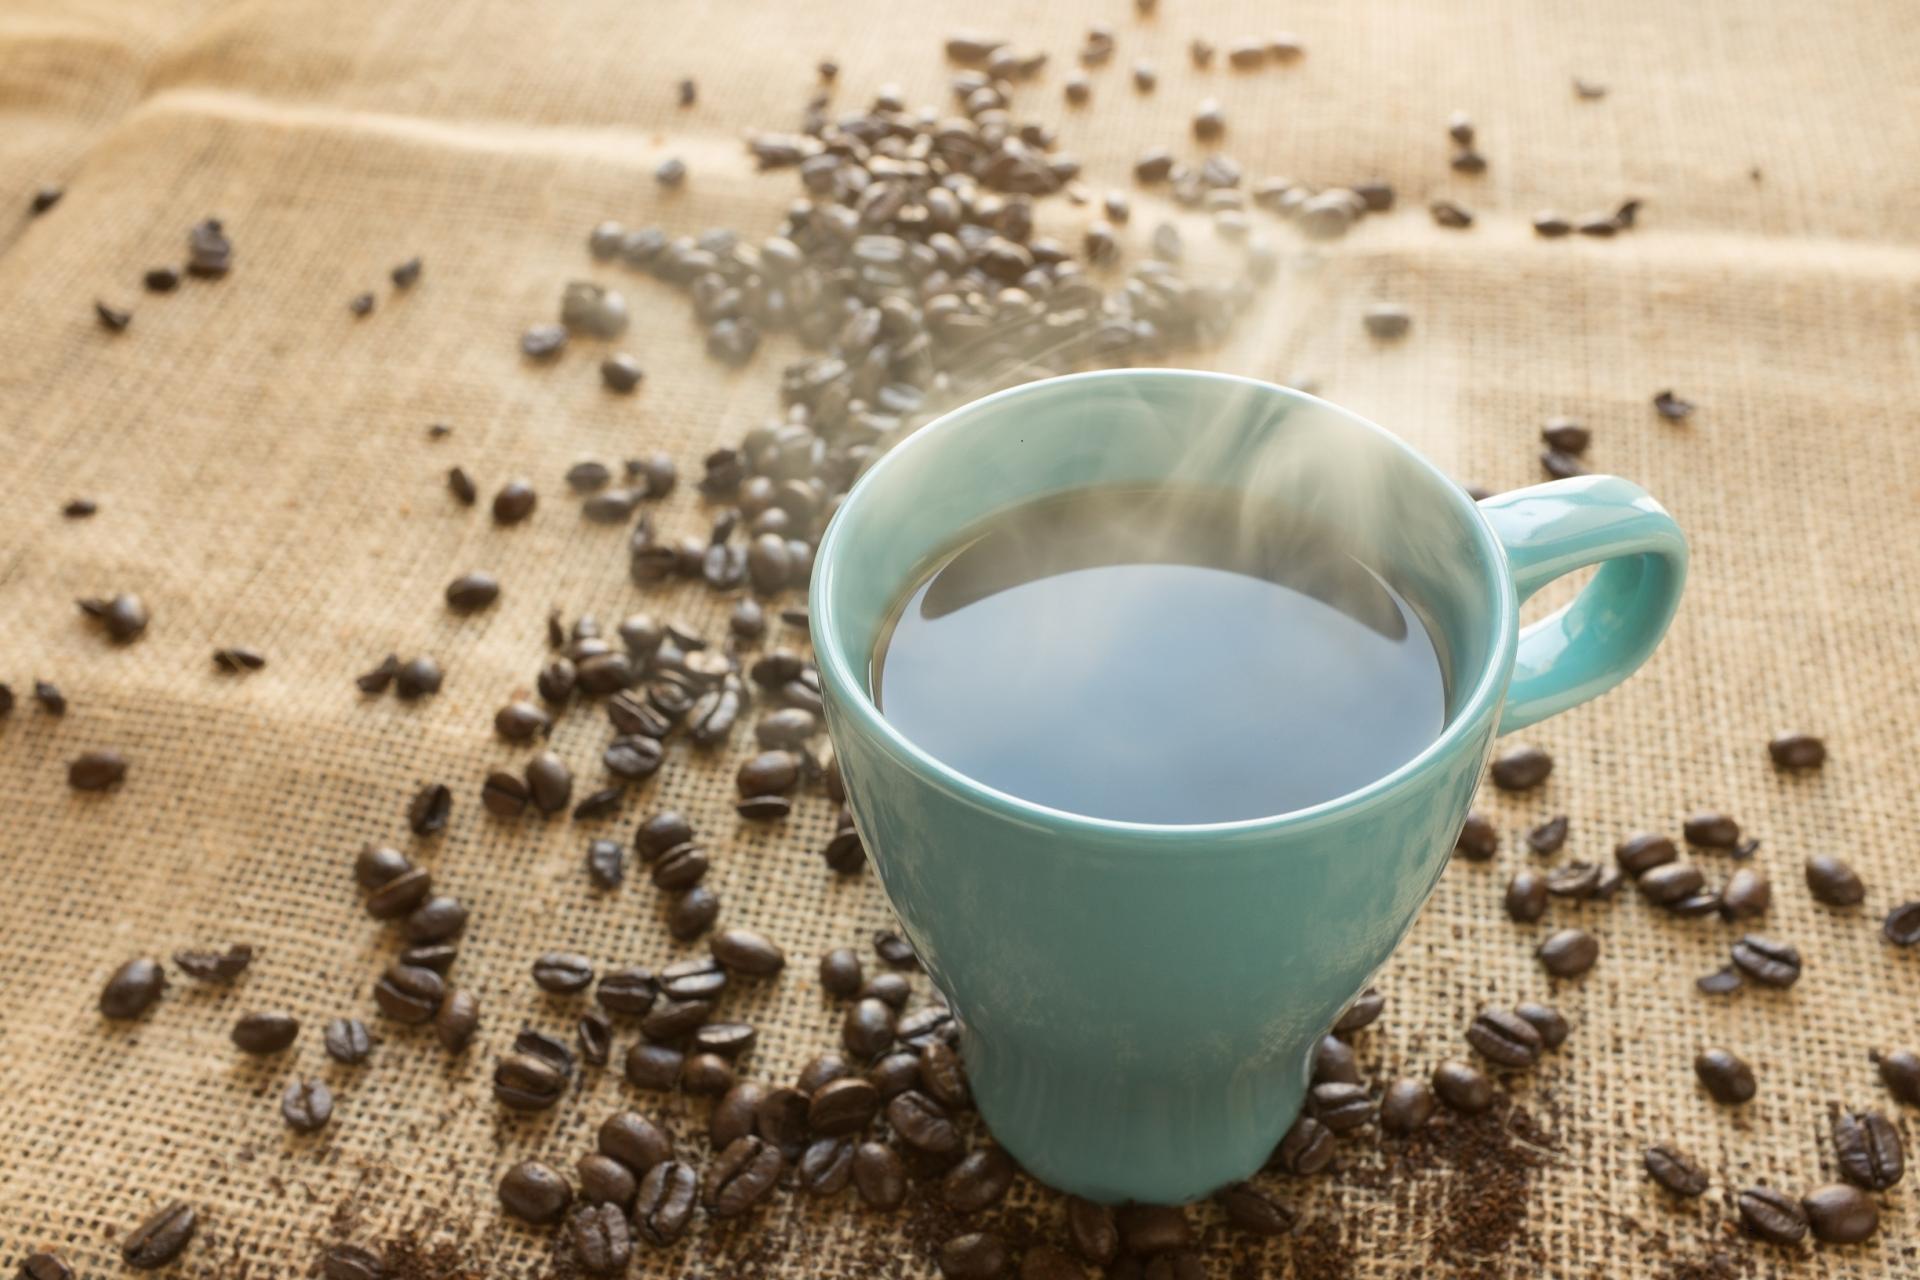 stock image - coffee cup with scattered coffee beans